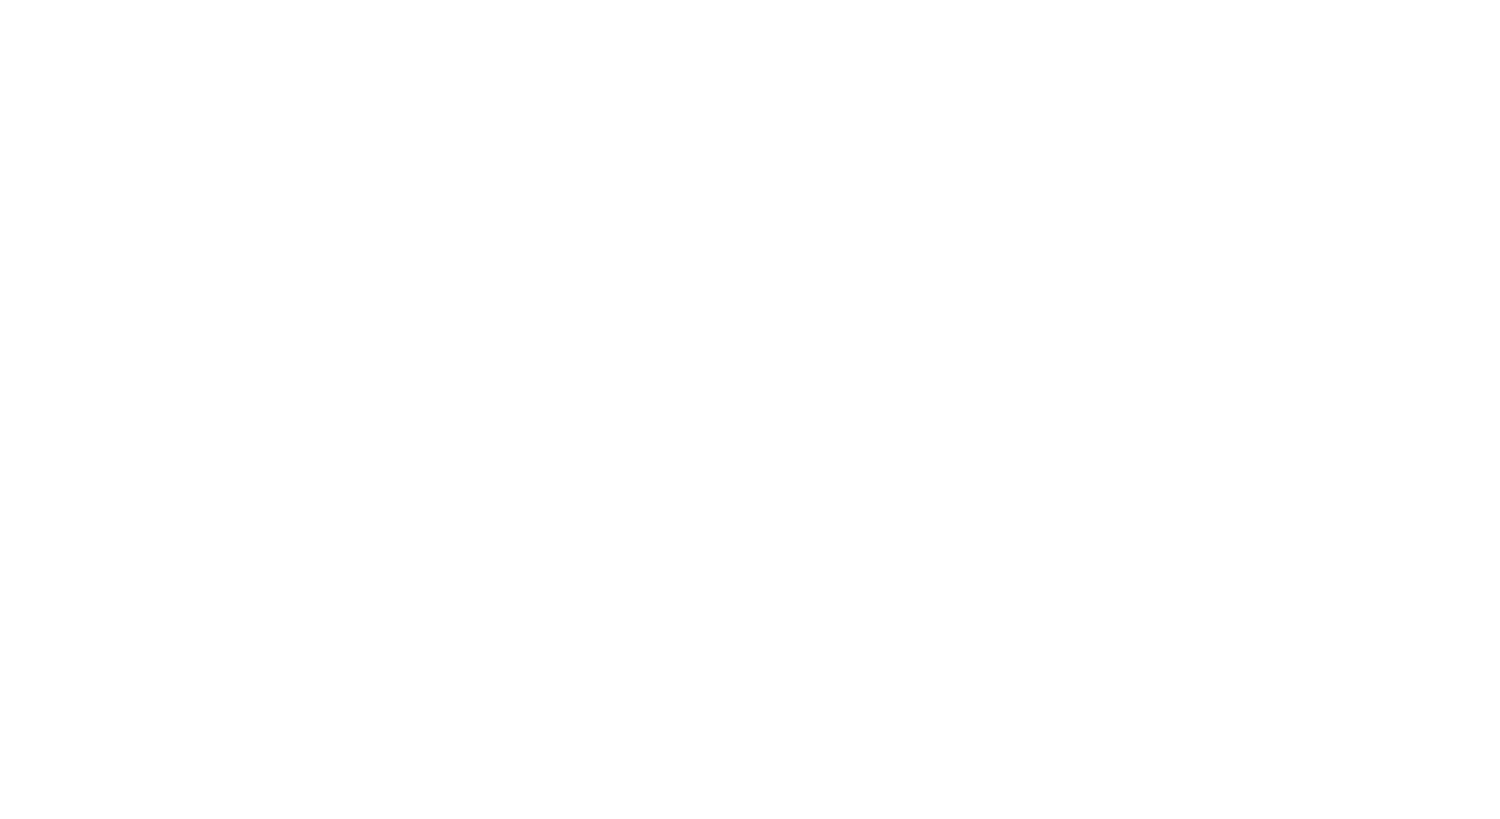 The Giglione-Ackerman Agency